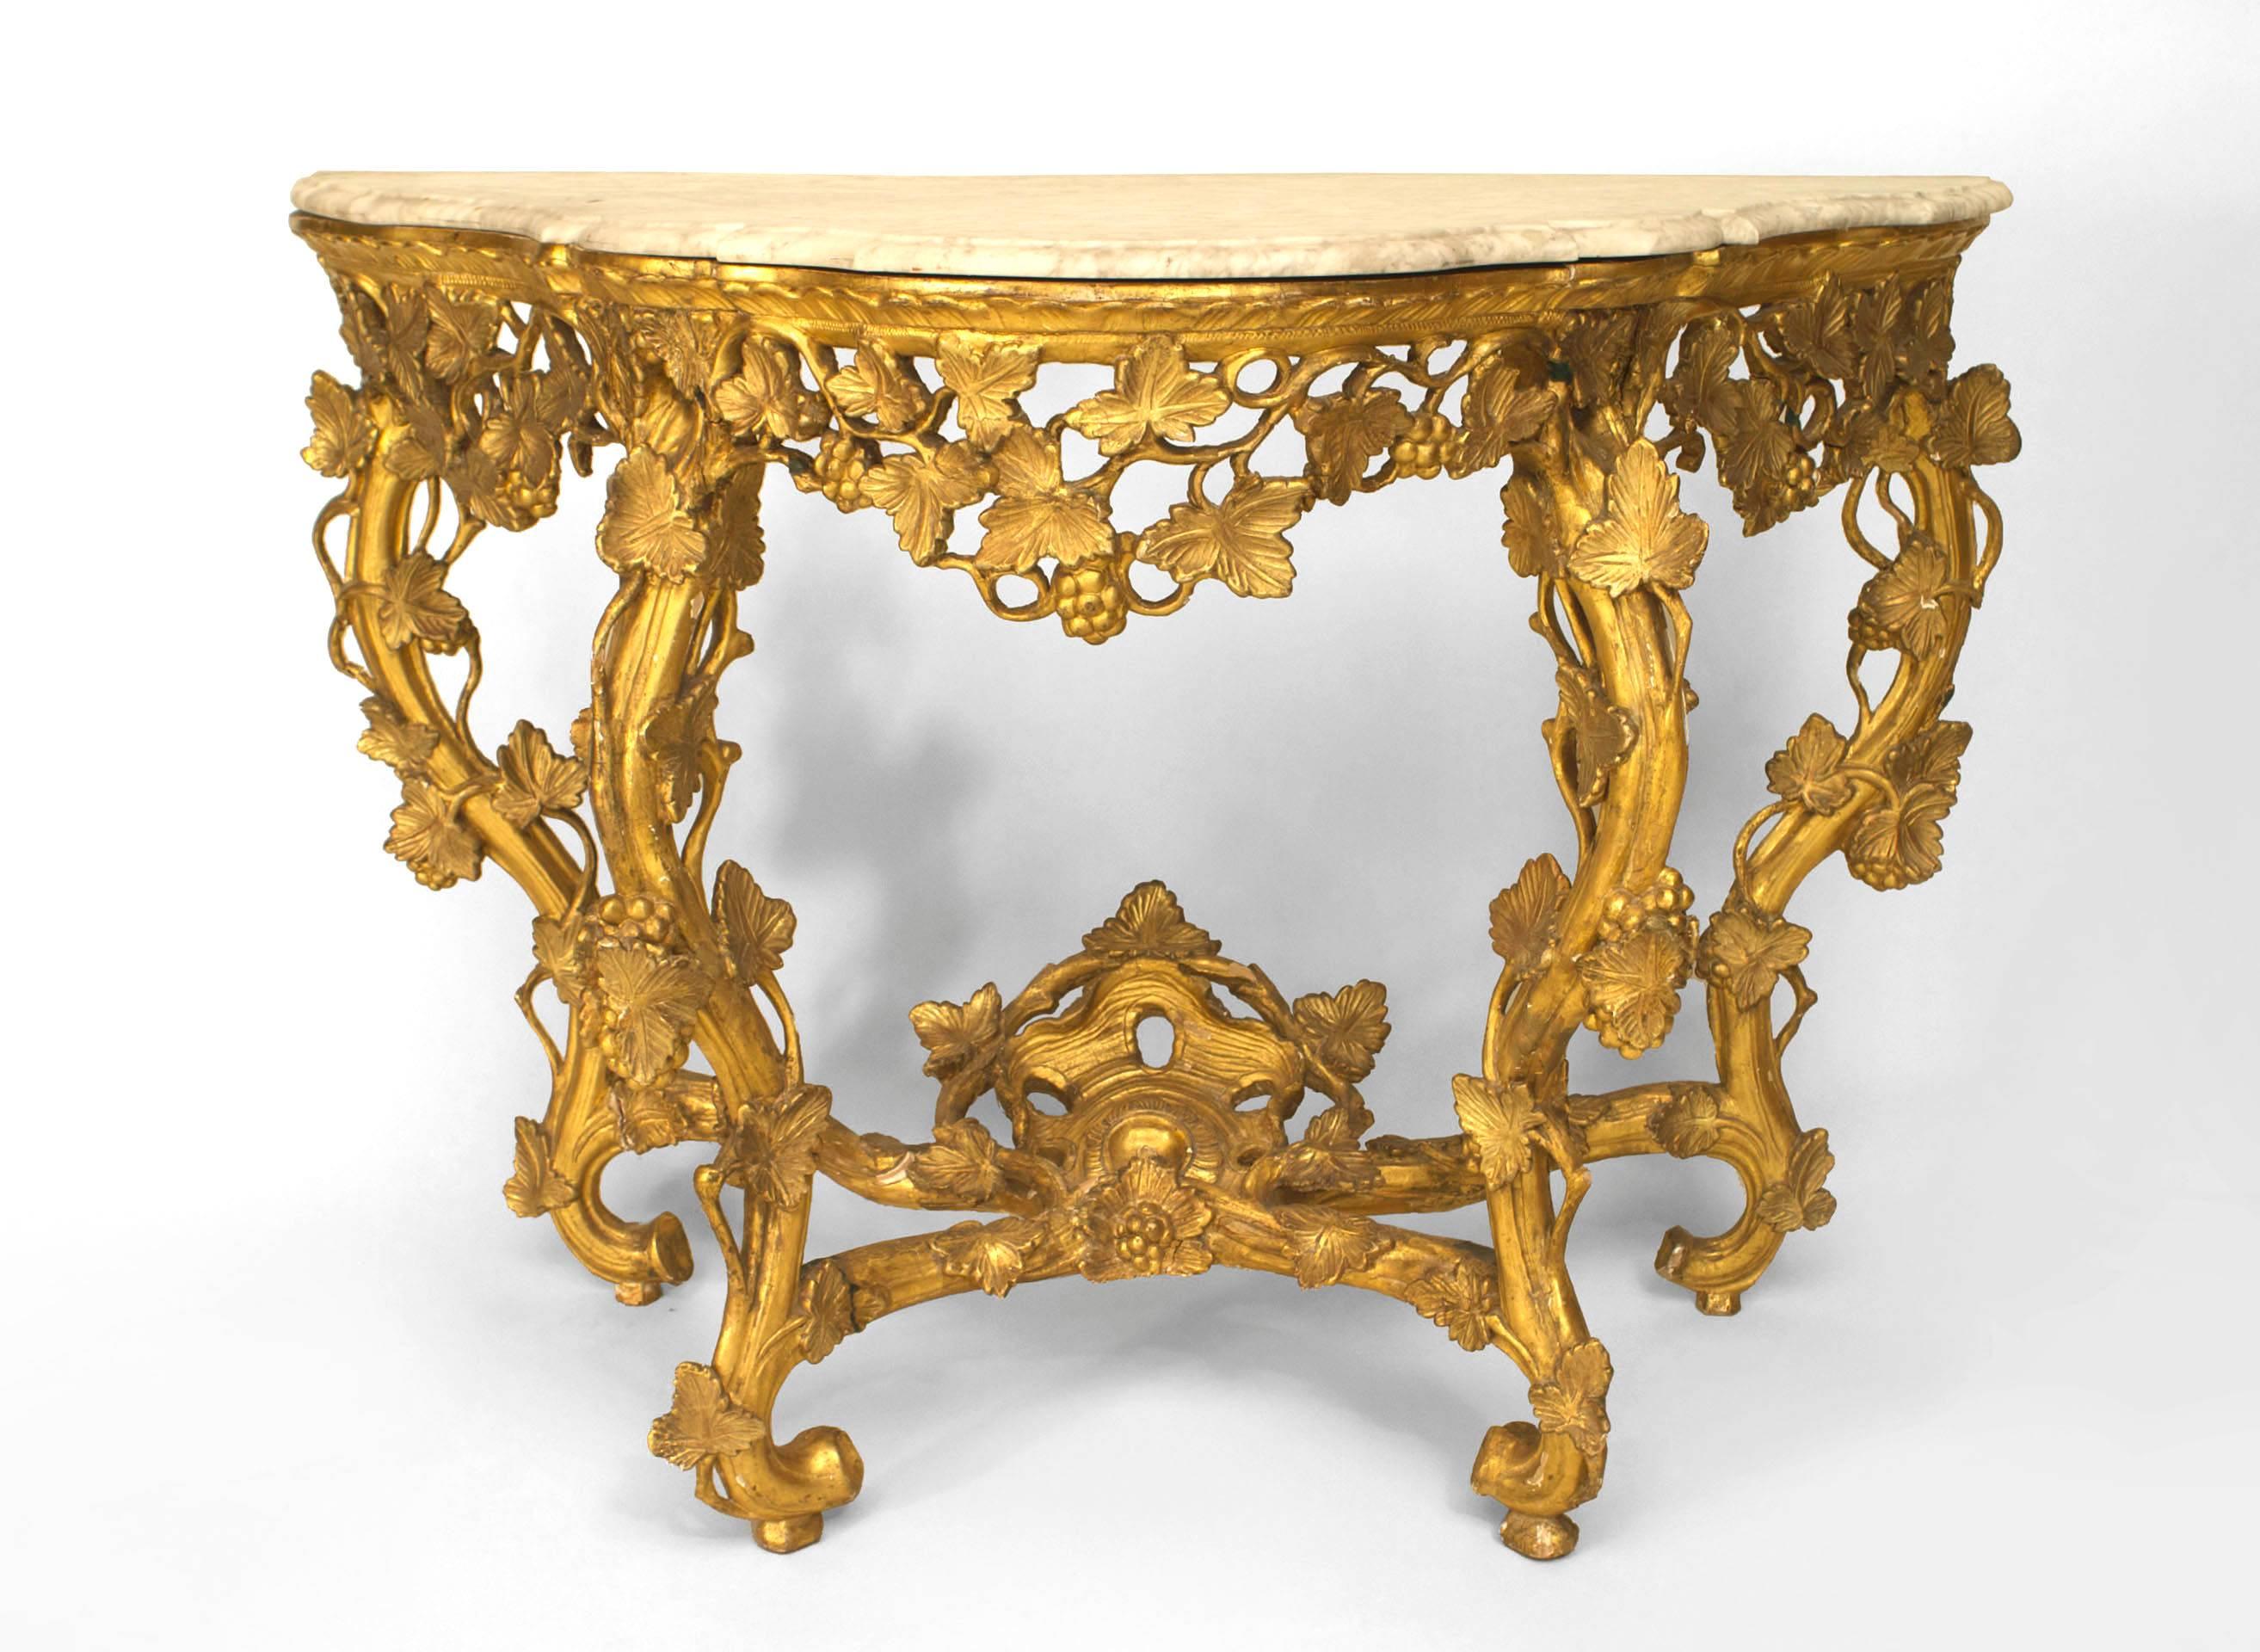 French Louis XV (18th Century) gilt console table with floral carved and filigree apron and legs with a stretcher and shaped white (rePaired) marble top.
